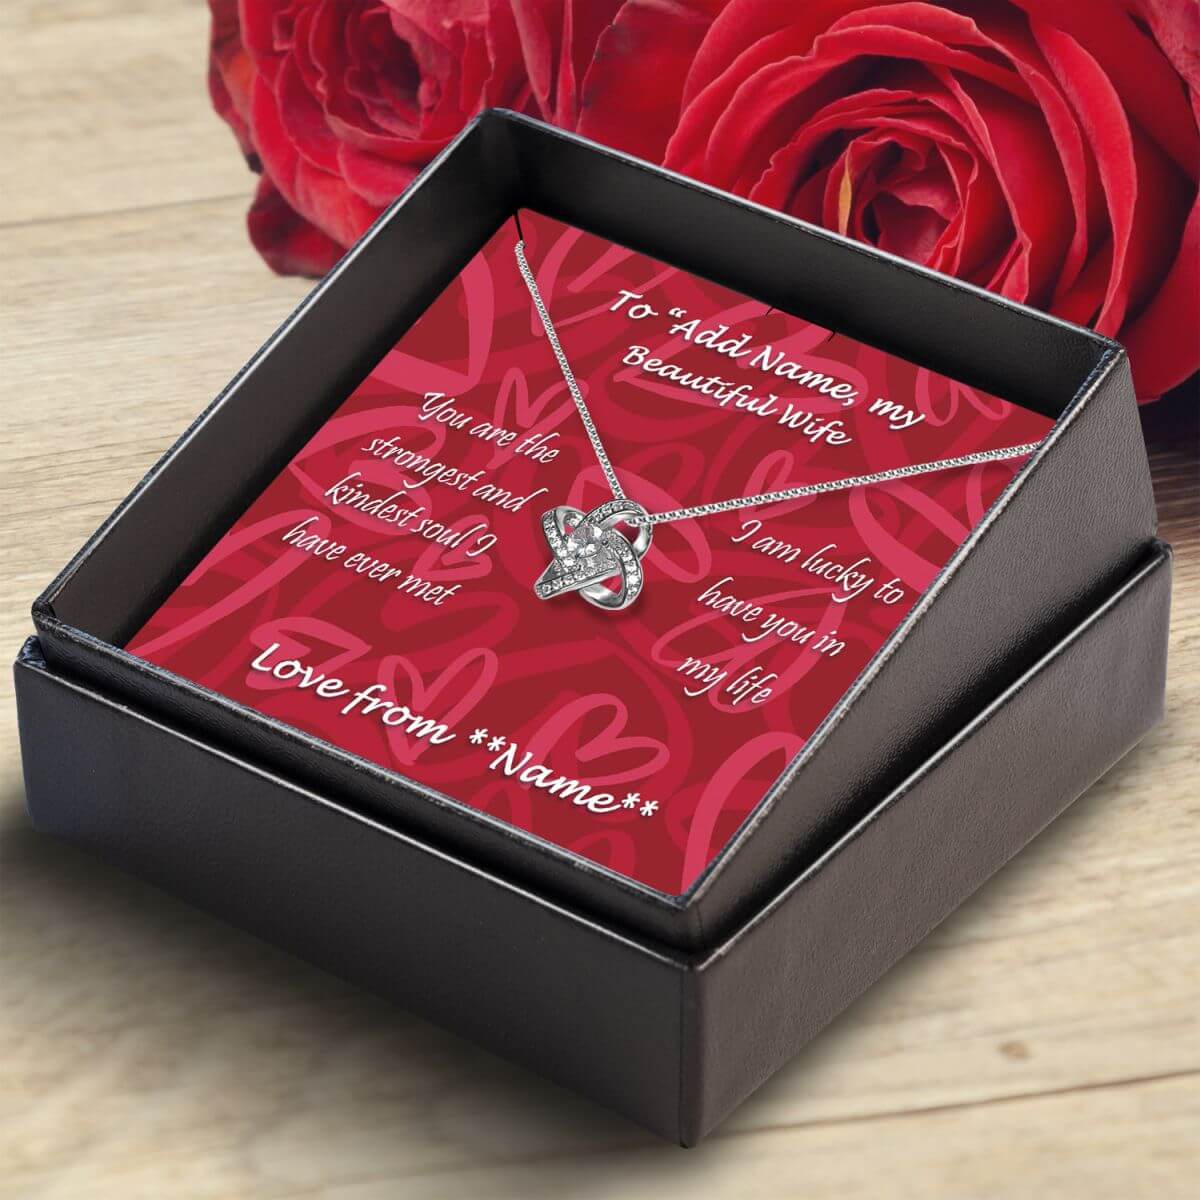 Necklace-Box-angled-Enduring-Love-Beautiful-Wife-personalised - BIG ON Jewellery, BIG ON Necklaces